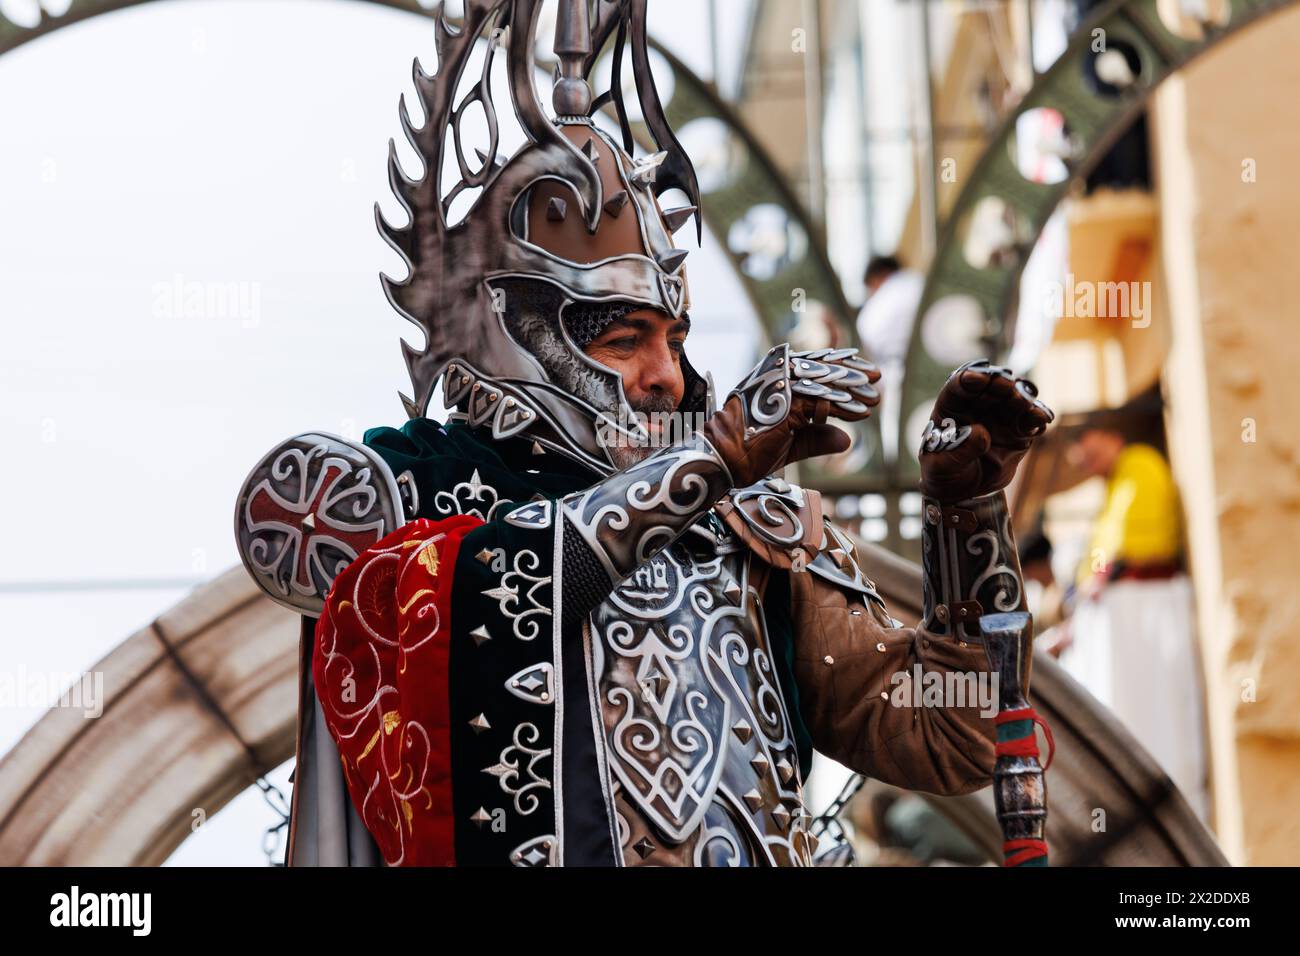 Alcoy, Spain, 04-20-2024: Christian captain of the Alcodianos troupe on his float in the Moors and Christians parade of Alcoy, a festival of internati Stock Photo